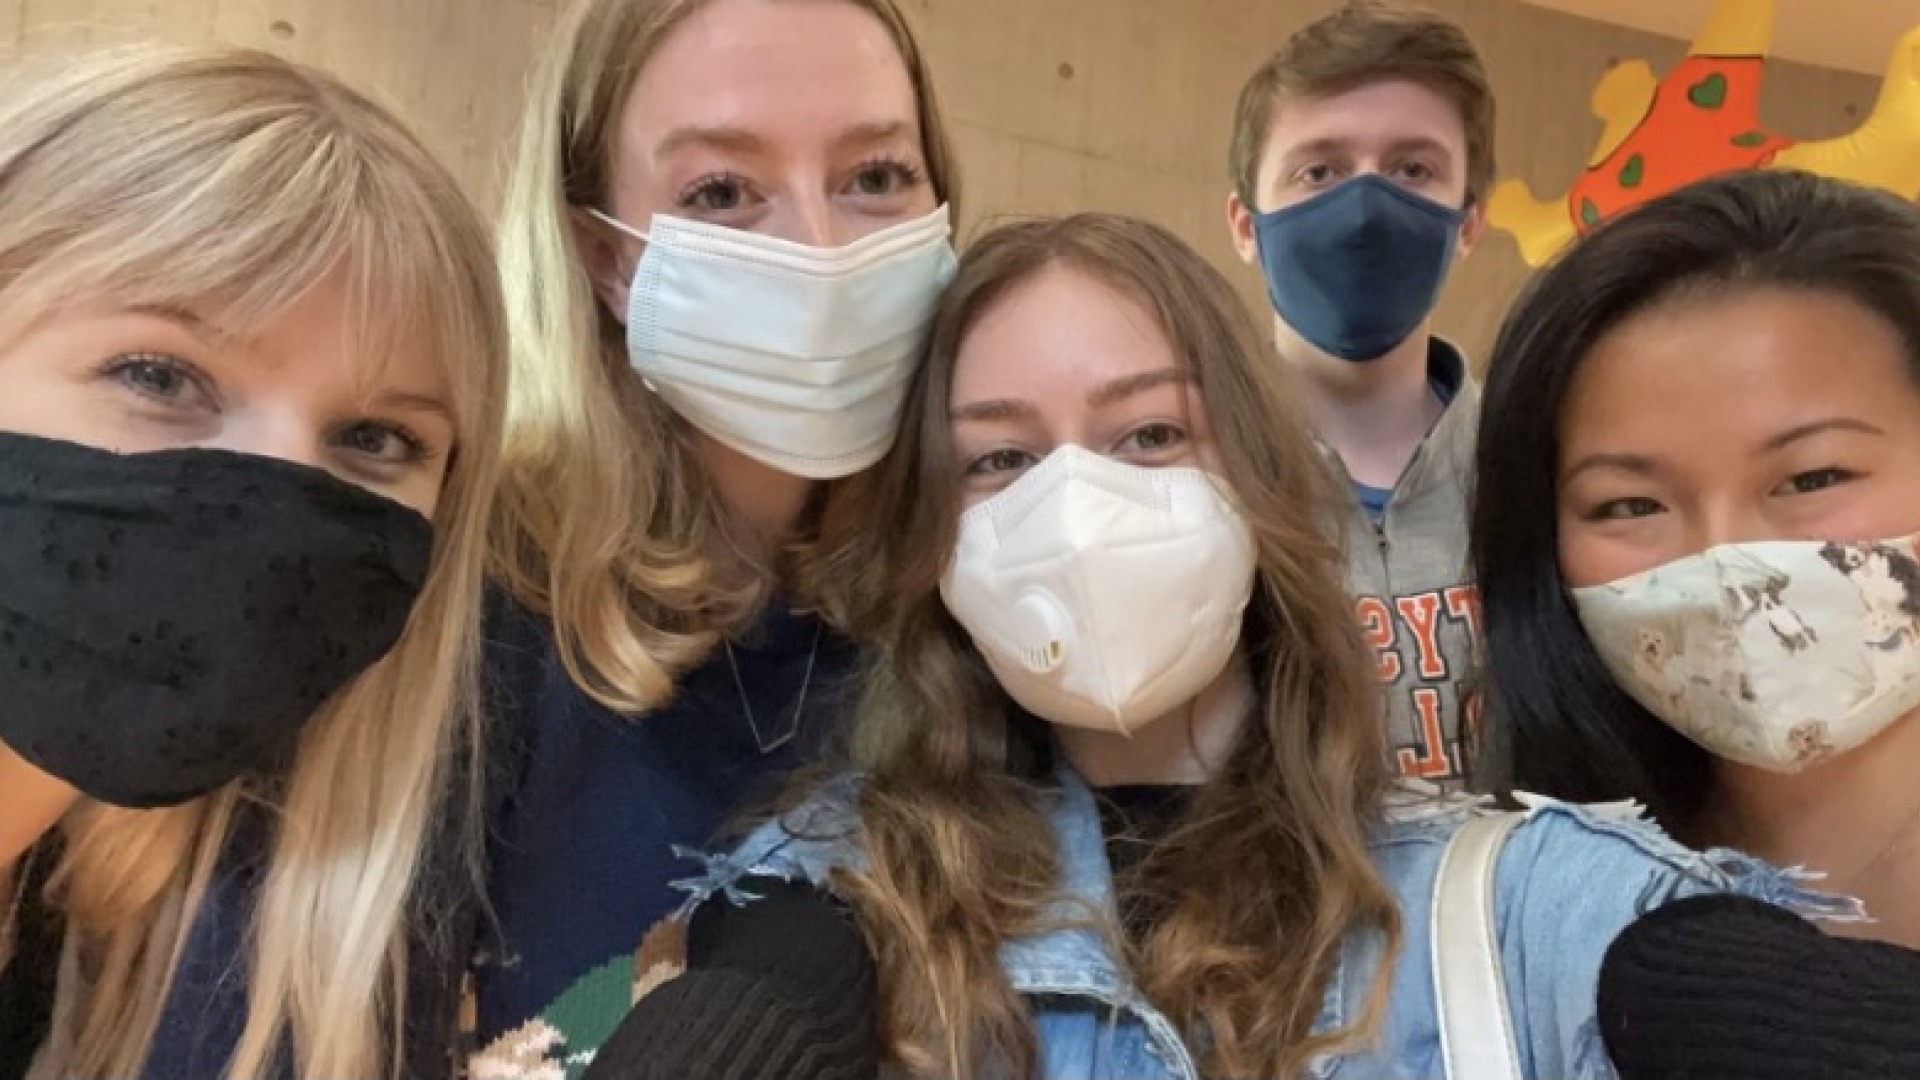 Group photo with masks on 